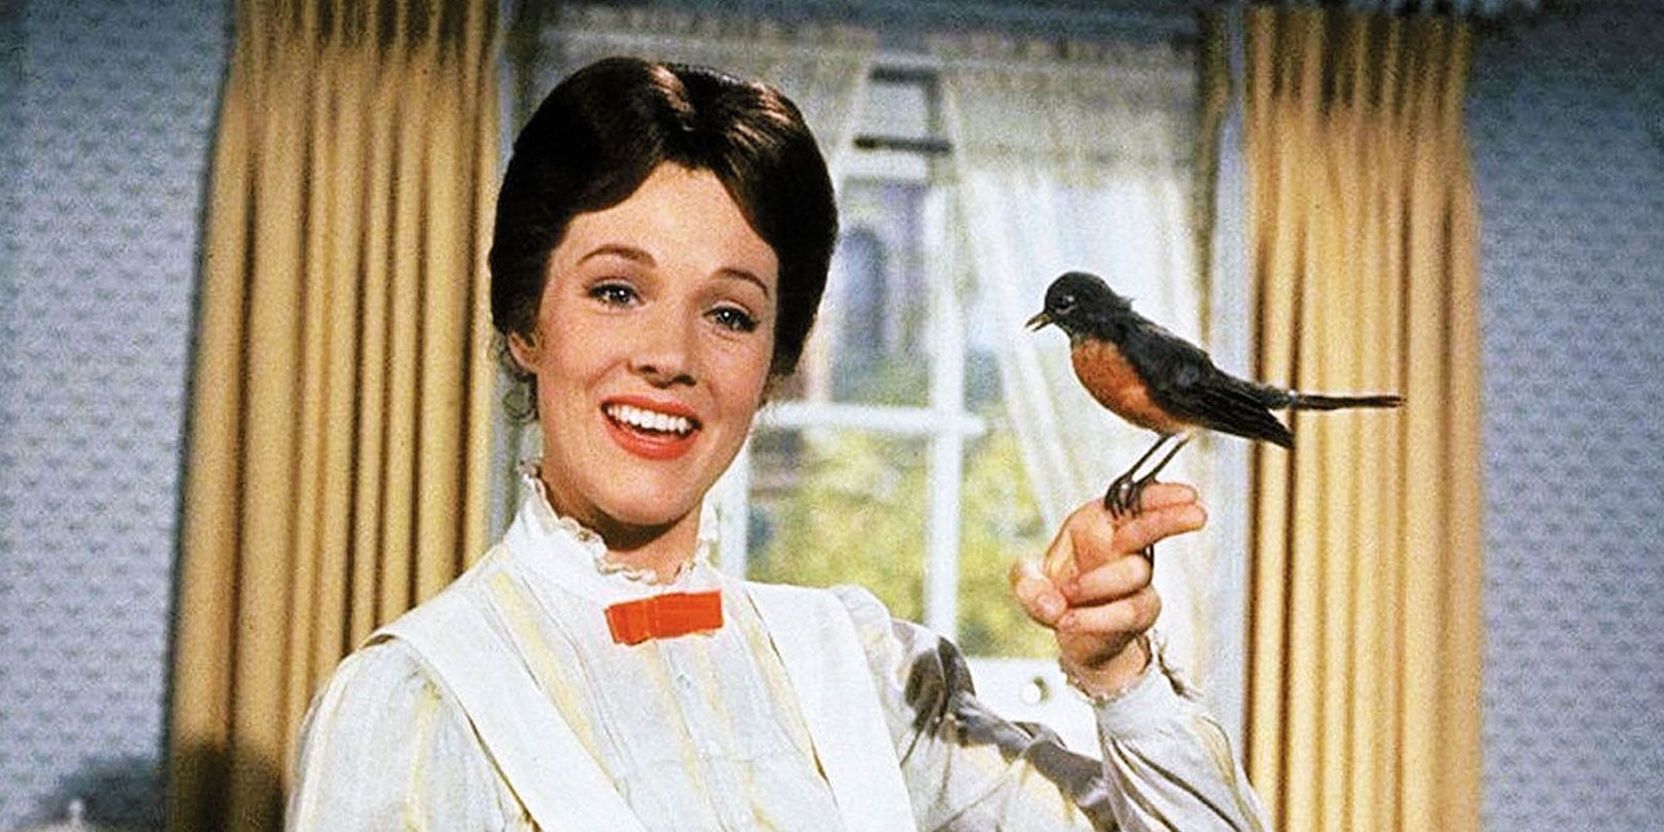 poppins 2 word phrases